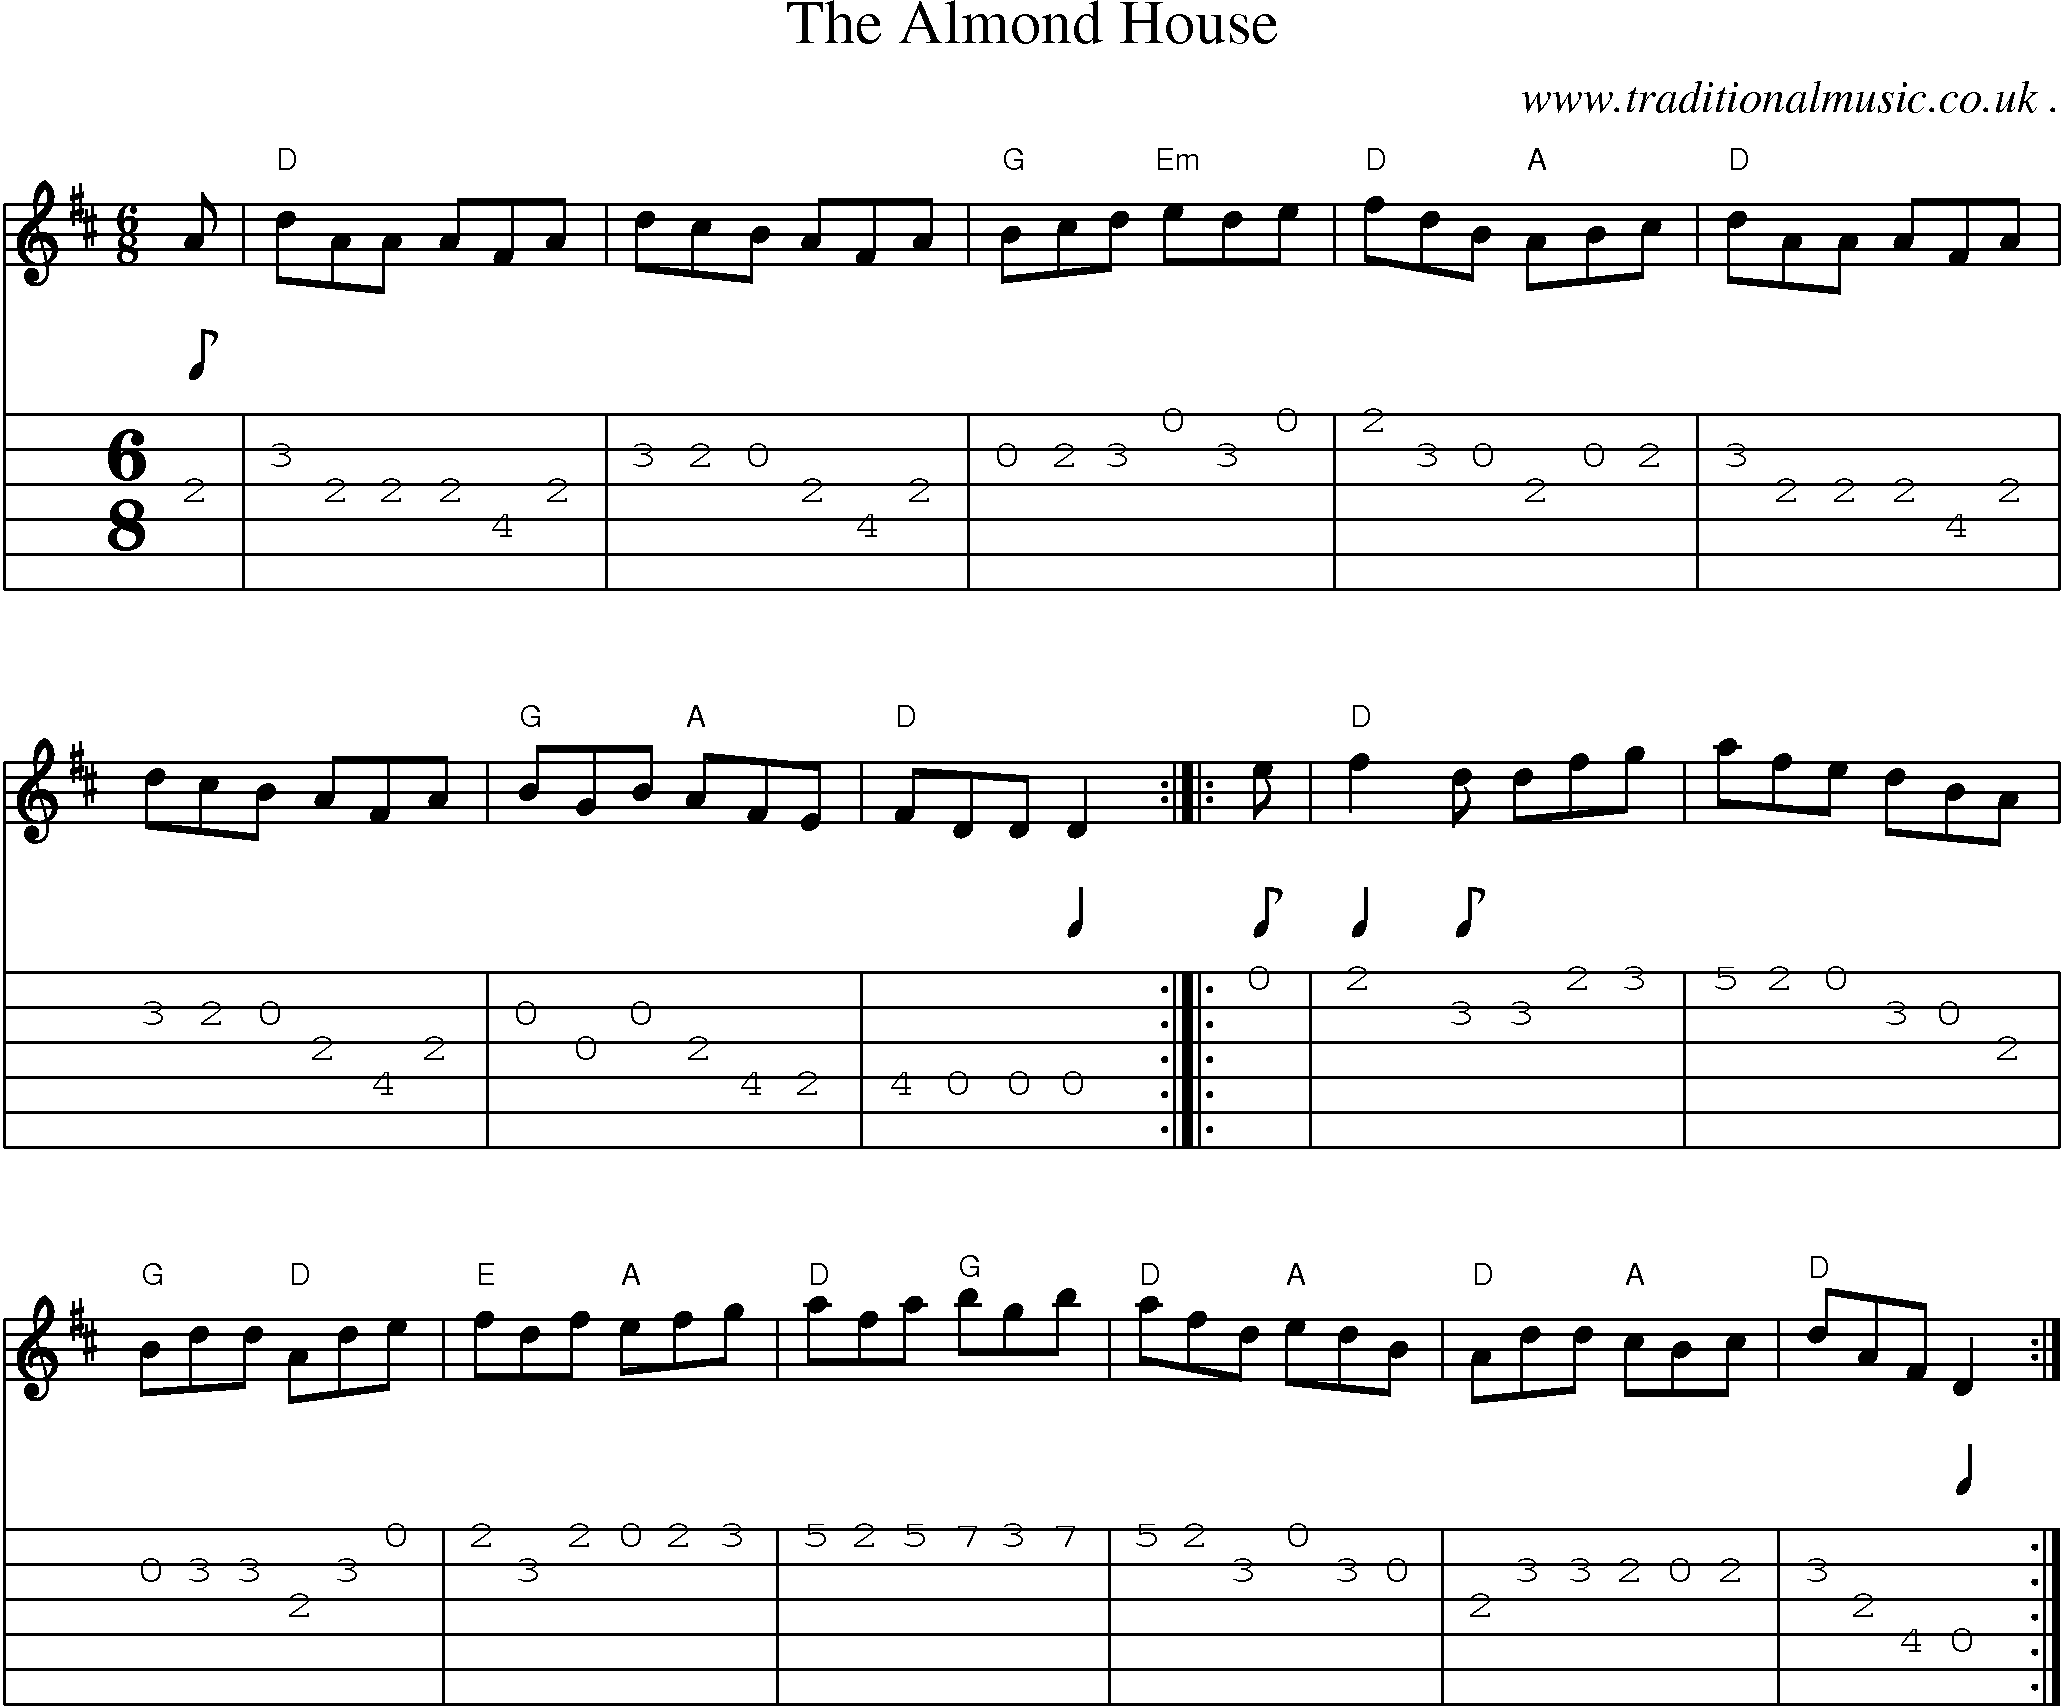 Music Score and Guitar Tabs for The Almond House